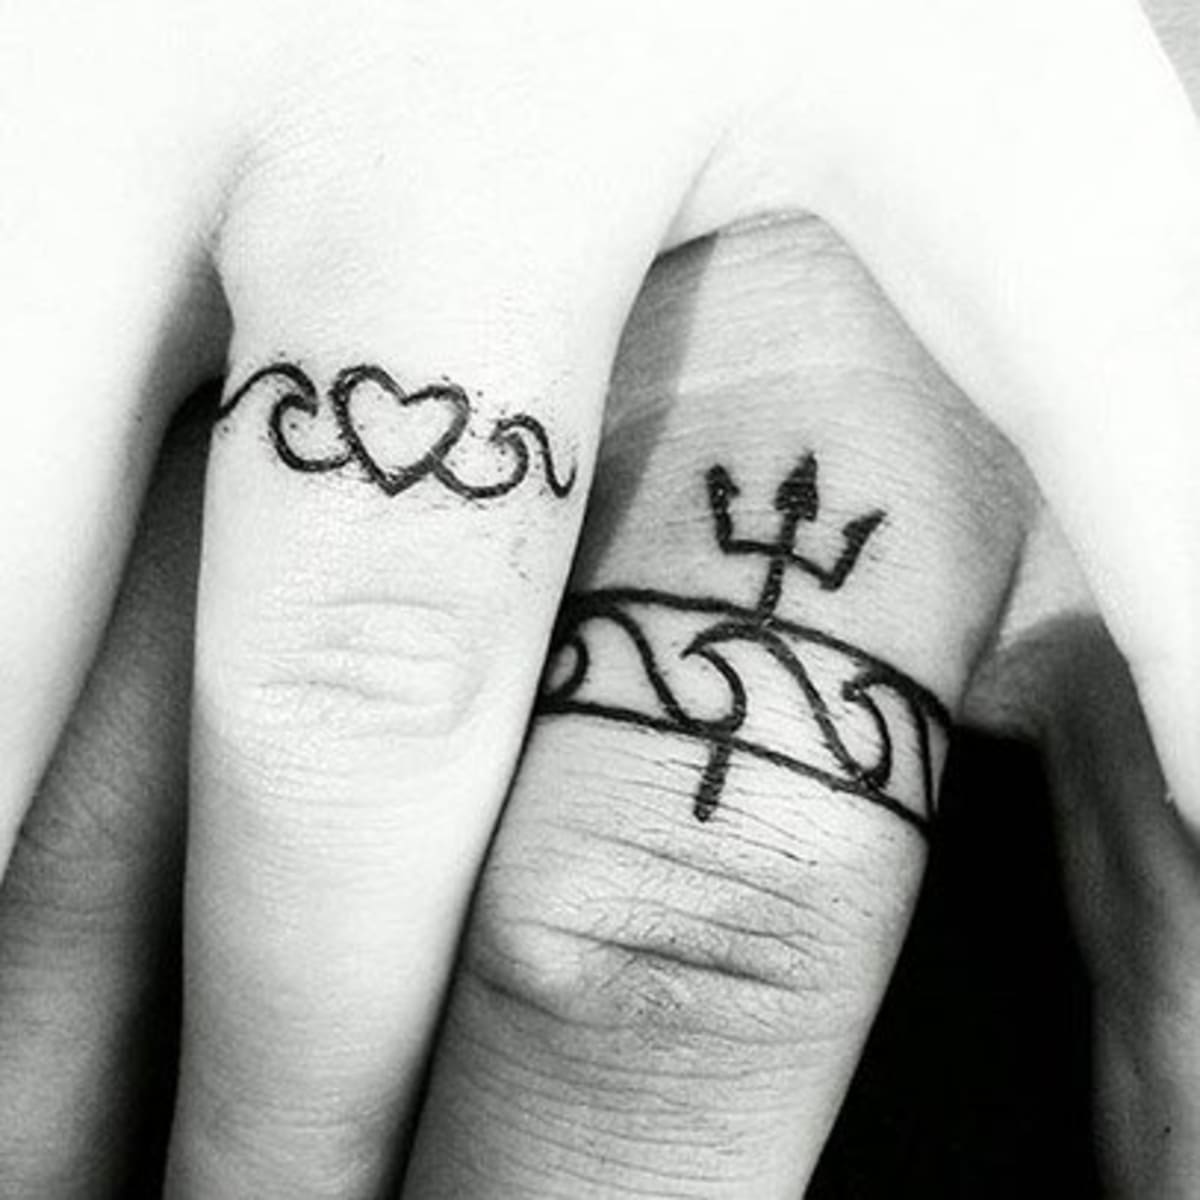 20 Unique Couple Tattoos For All The Lovers Out There! | Couple tattoos  unique, Matching tattoos, Matching couple tattoos